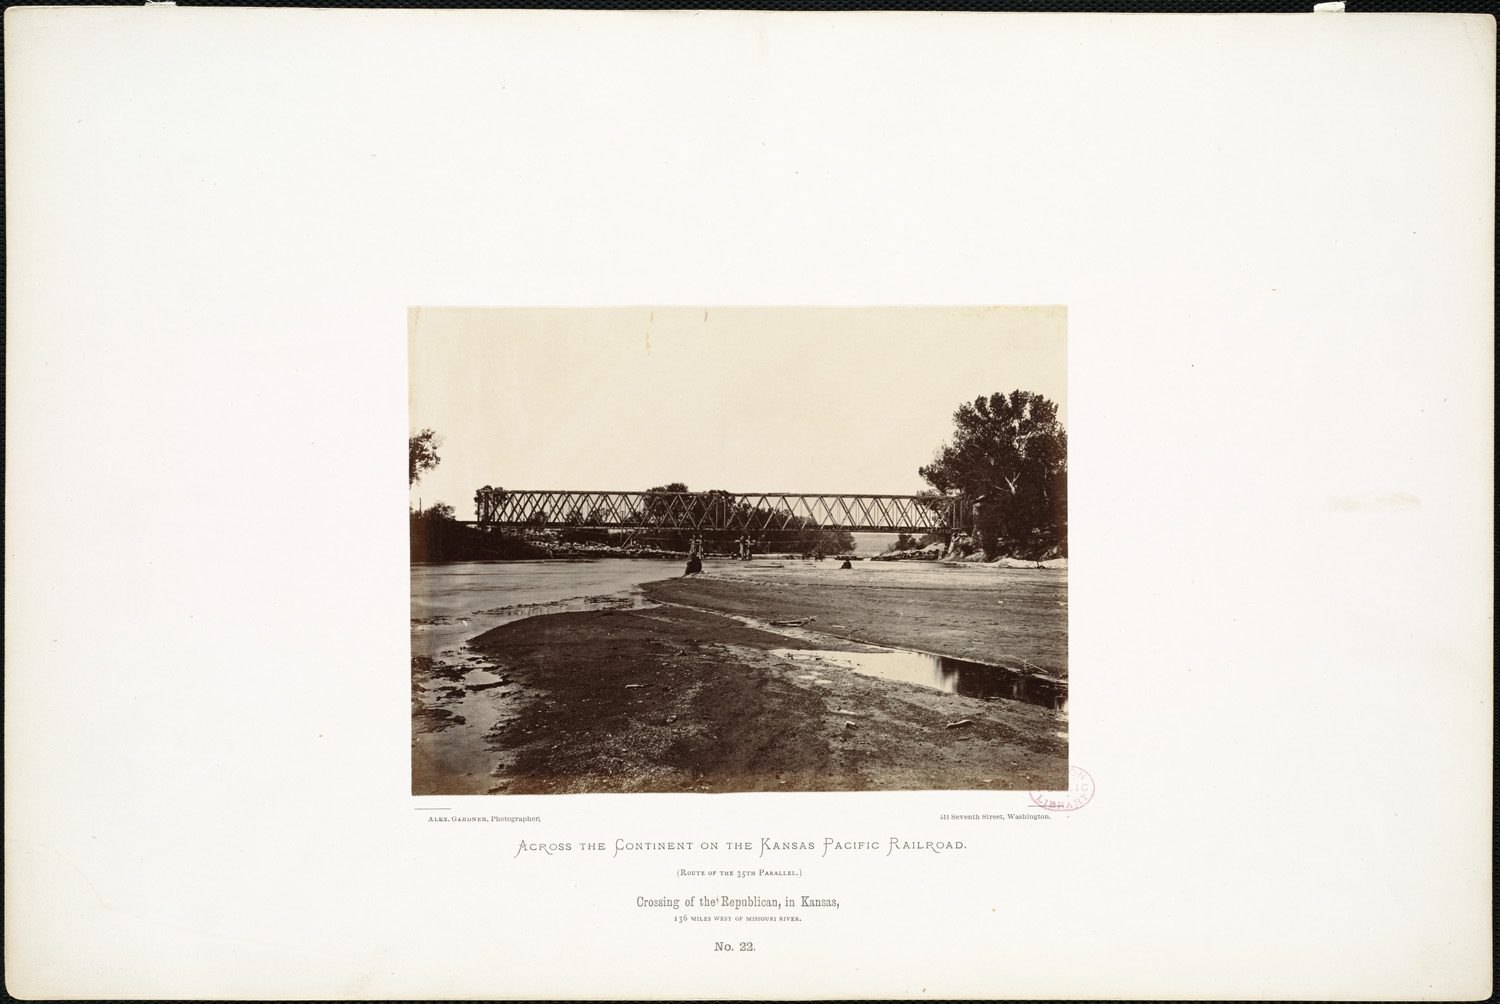 The Kansas Pacific Railway bridge across the Republican River and behind that, a pontoon bridge. [ Alexander Gardner (photographer), 1867][14] The present Union Pacific Railroad and Custer Road/Grant Road (previously U.S. Route 40) still bridge the Republican River at the same locations. Public access to the Kansas River National Water Trail is between the two bridges.